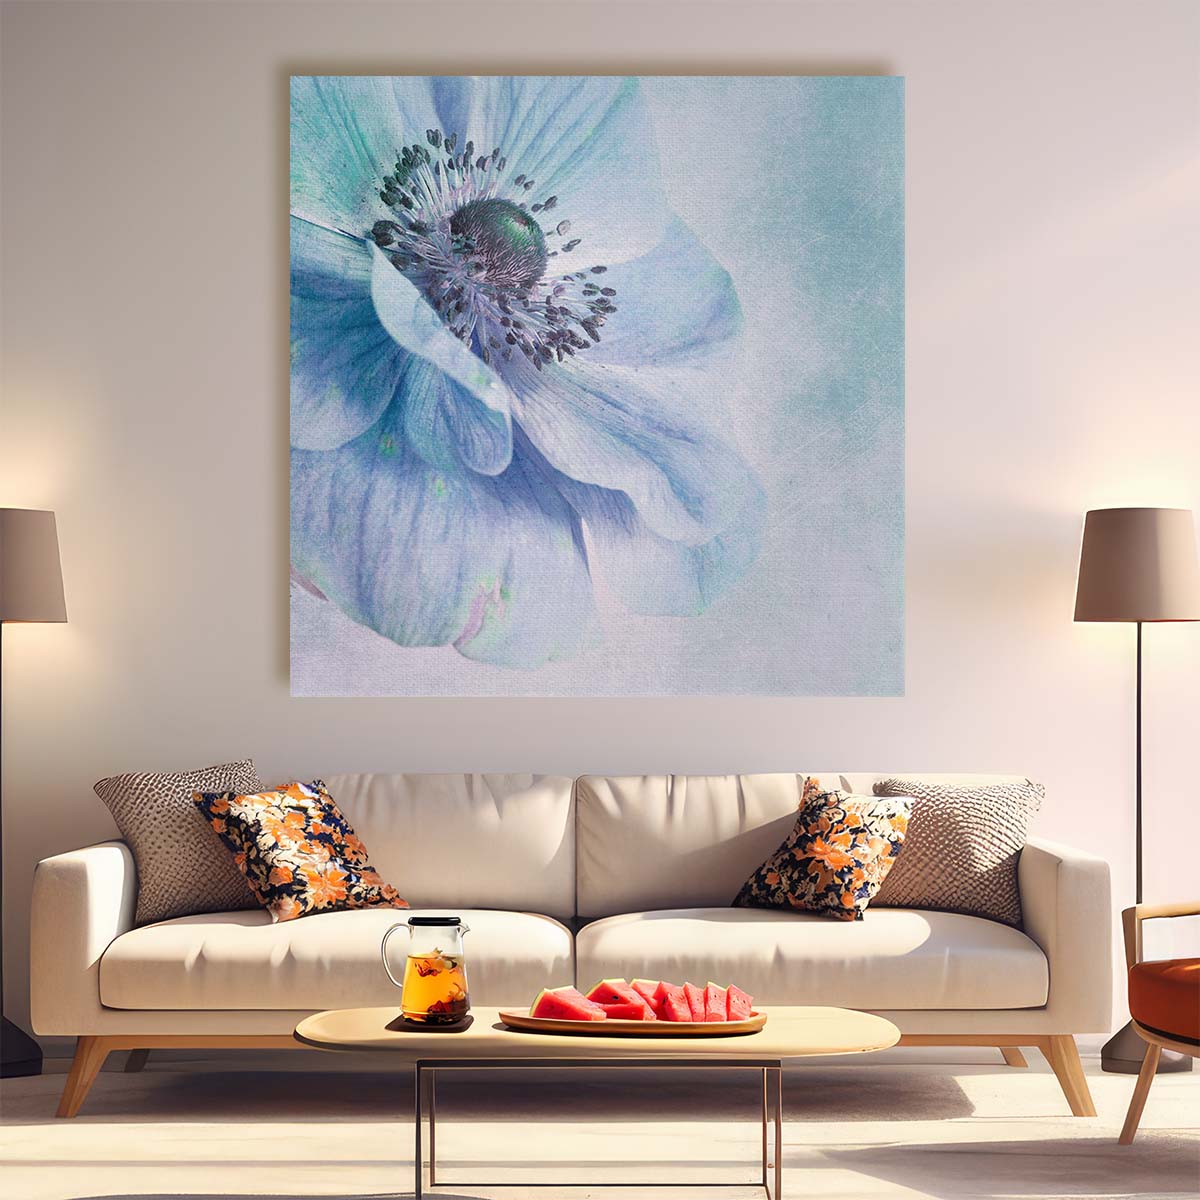 Delicate Turquoise Floral Macro Photography Botanical Square Wall Art by Luxuriance Designs. Made in USA.